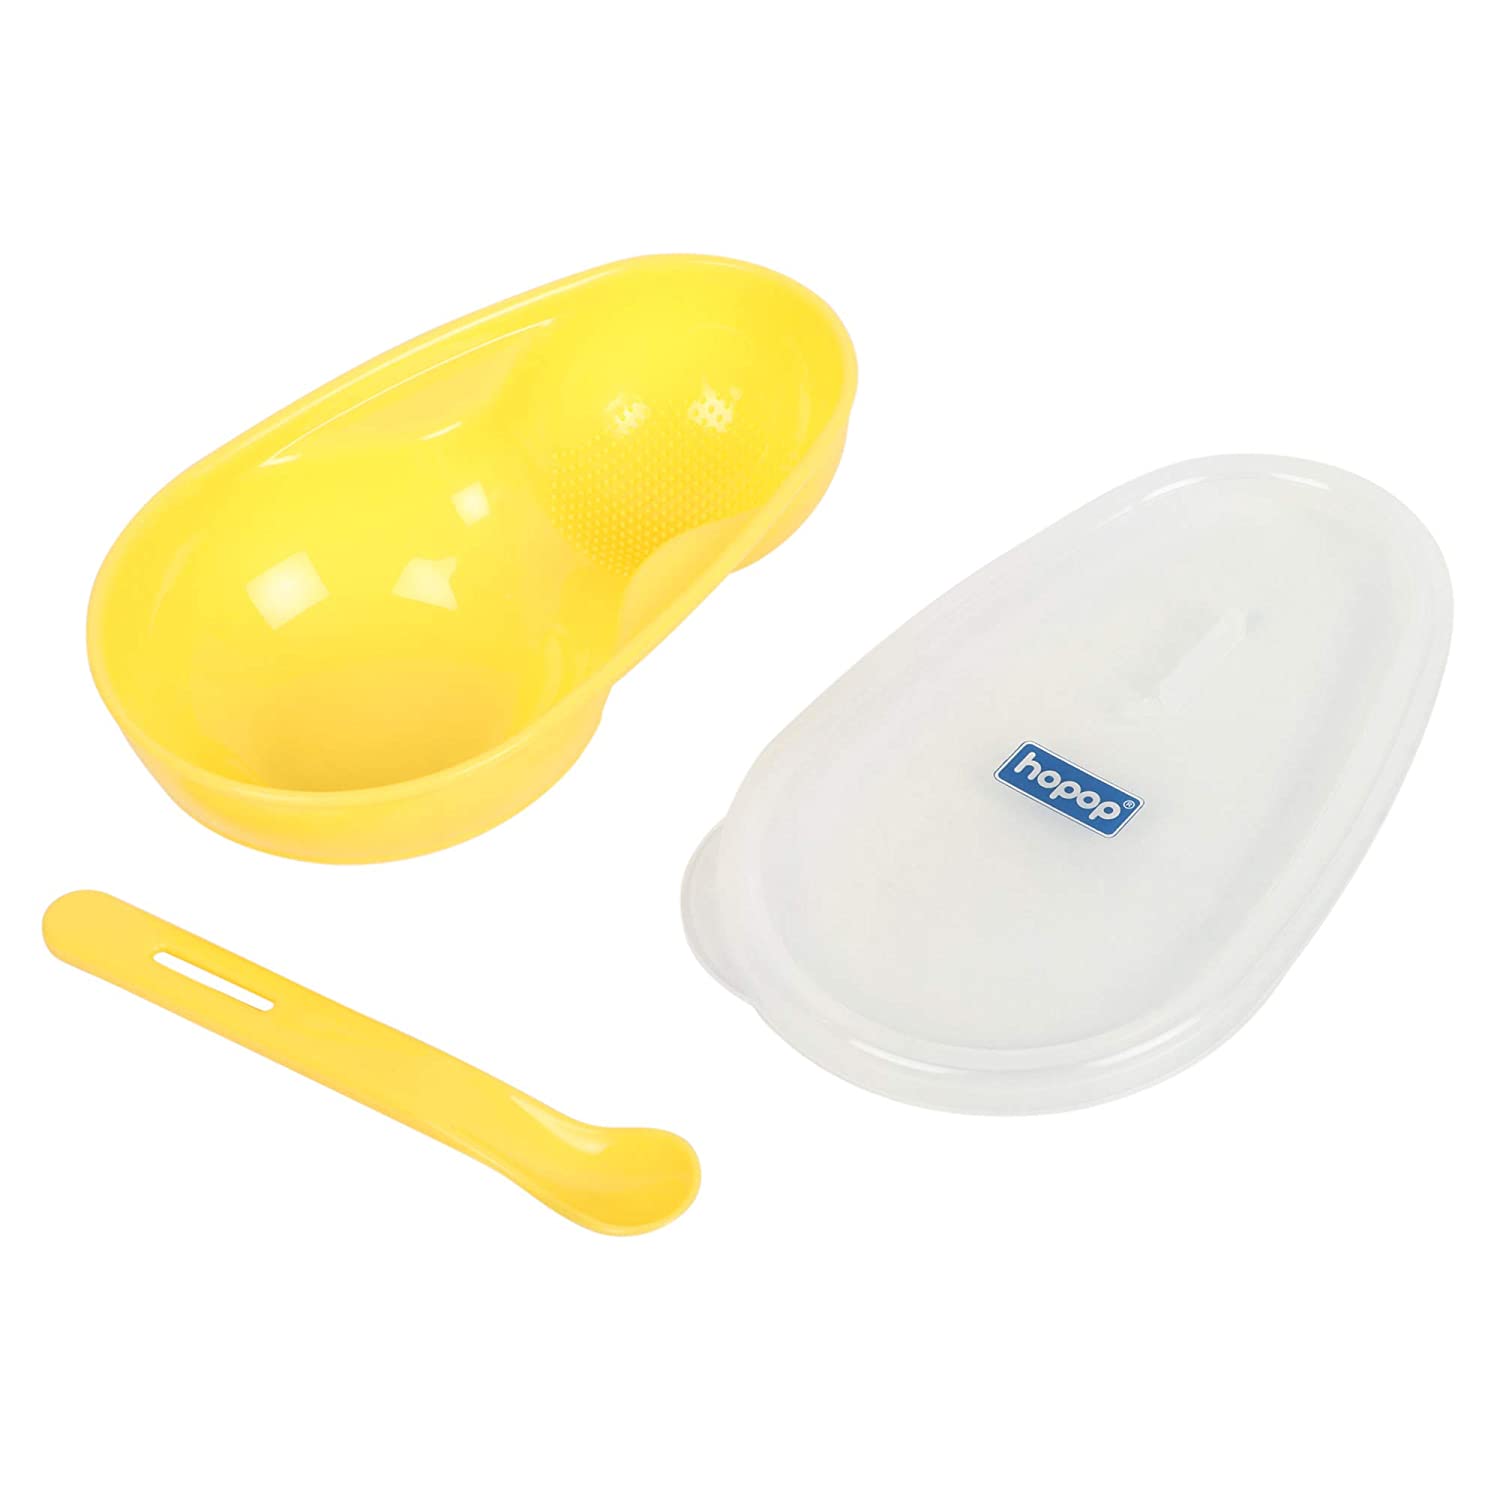 HOPOP Feeding Bowl With Lid & Spoon For Babies - Yellow 6m+, 210ml